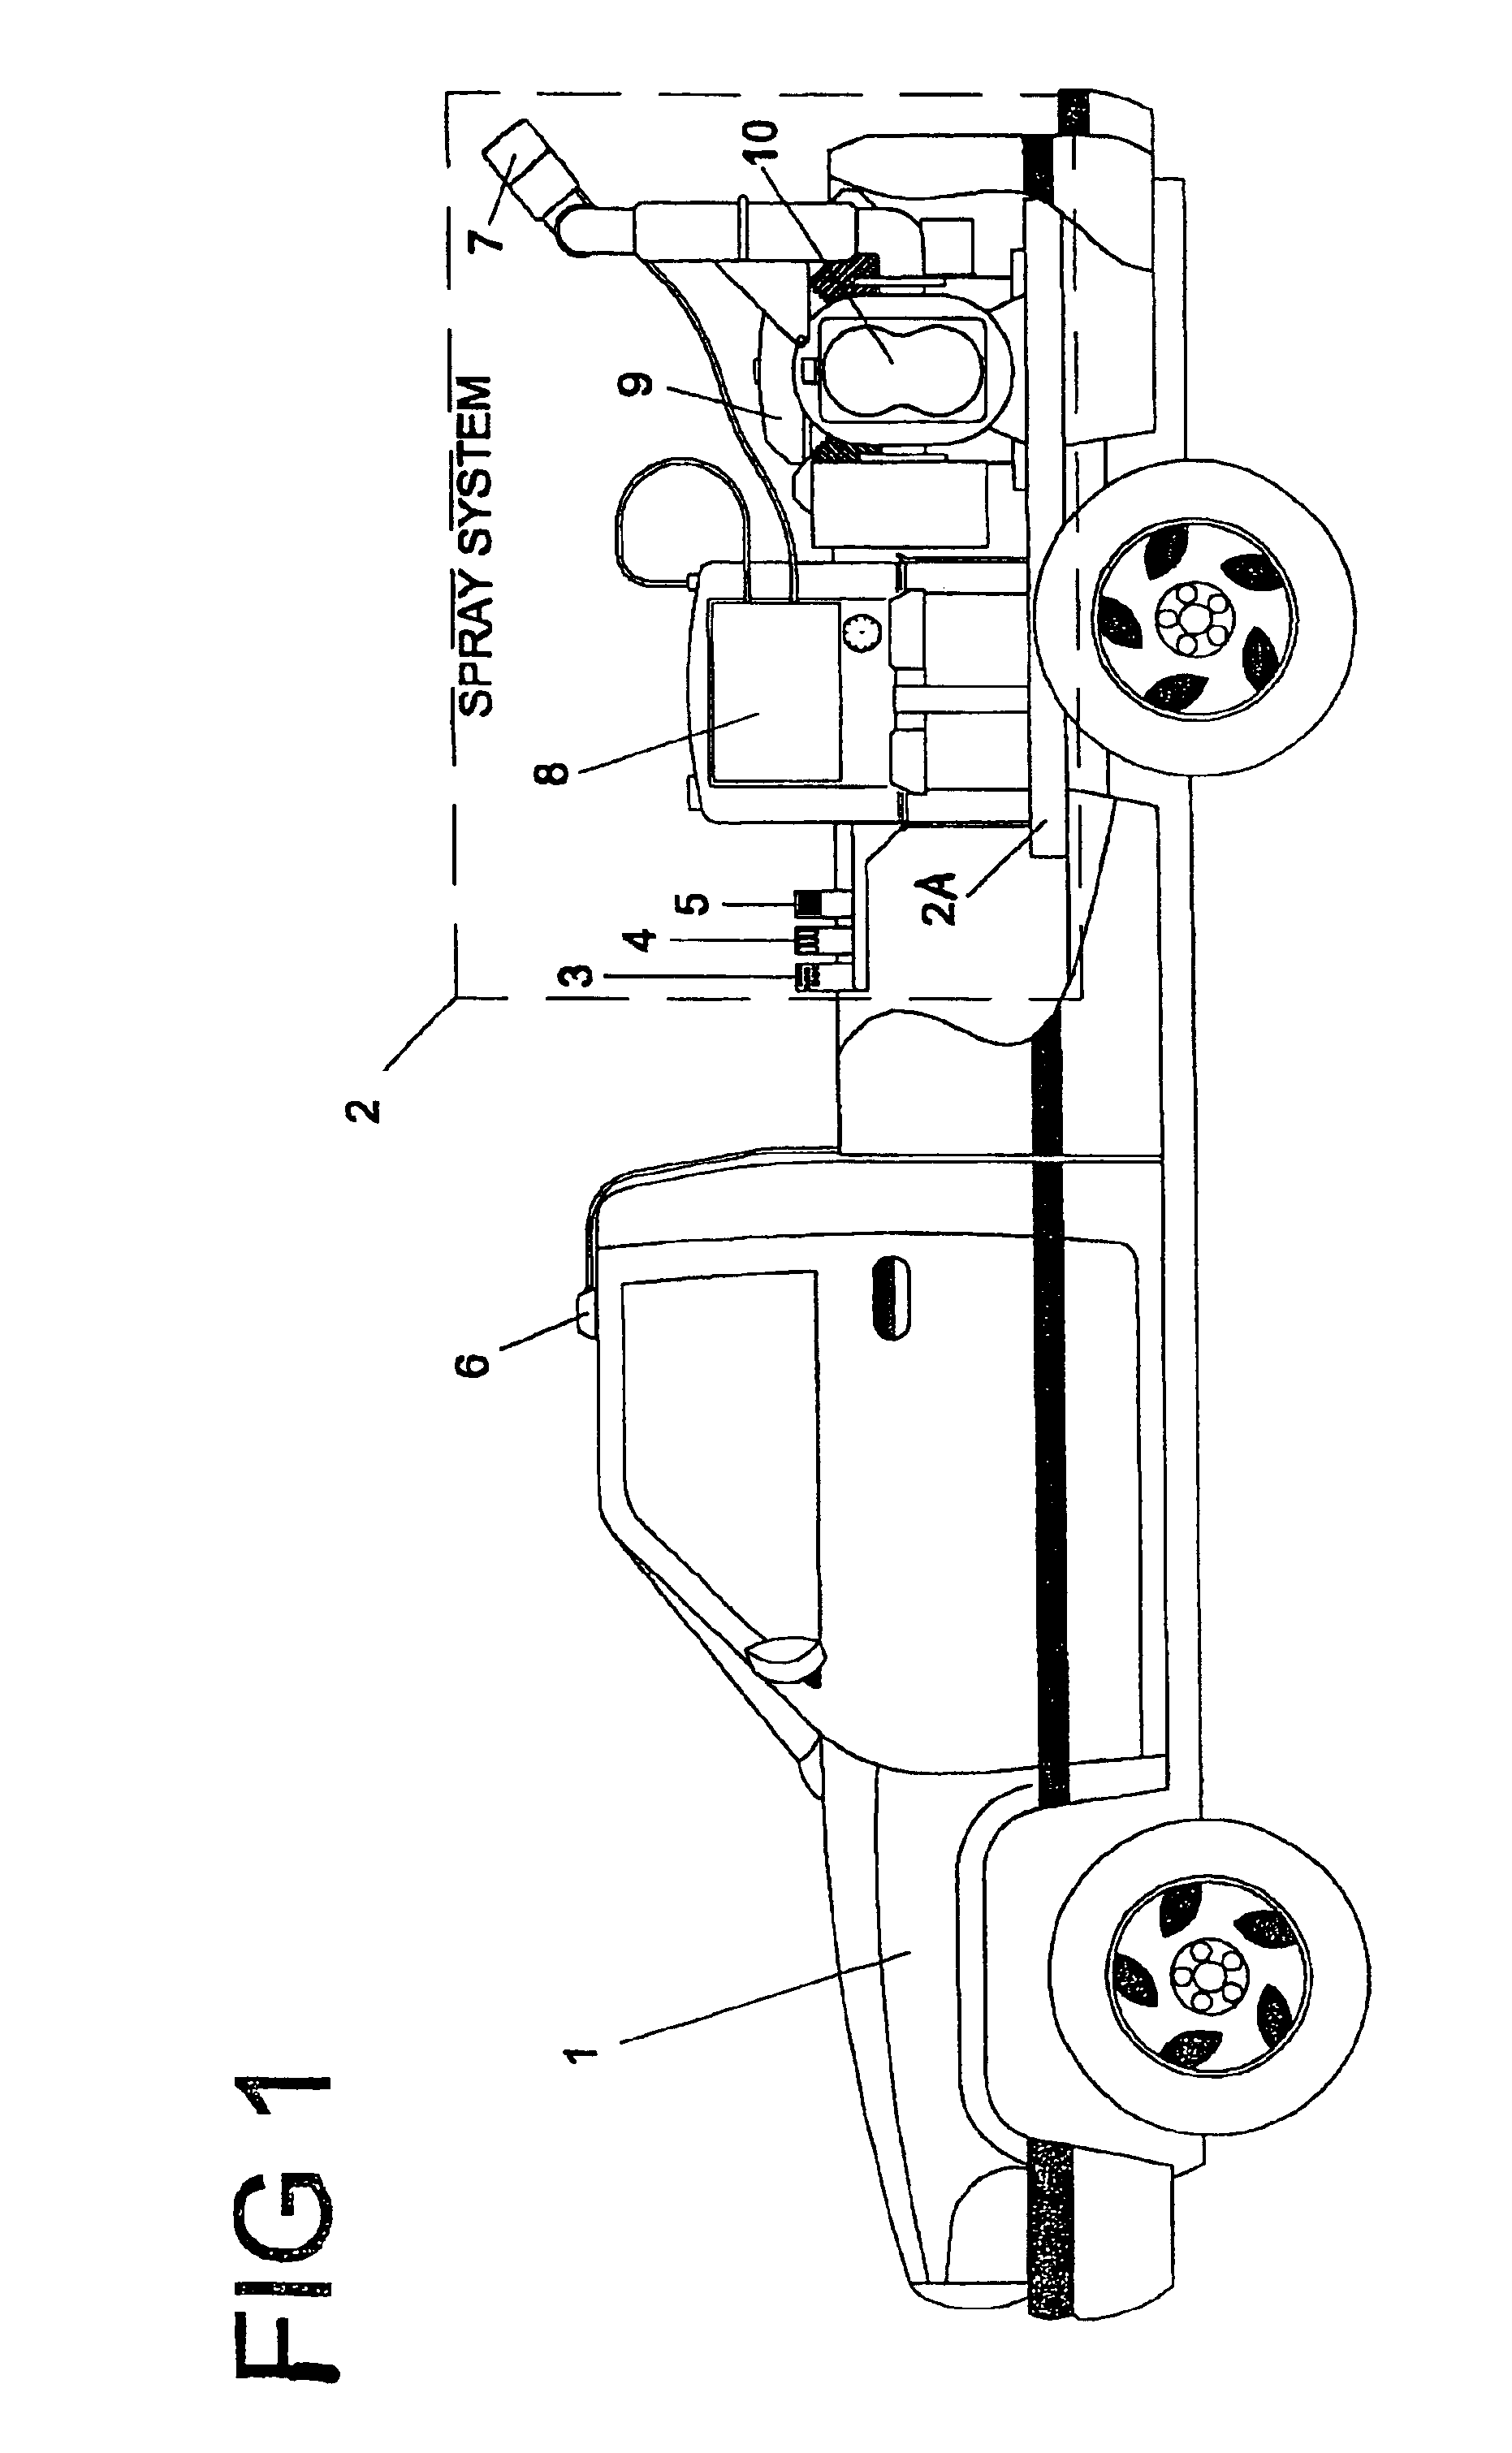 Closed-loop mosquito insecticide delivery system and method